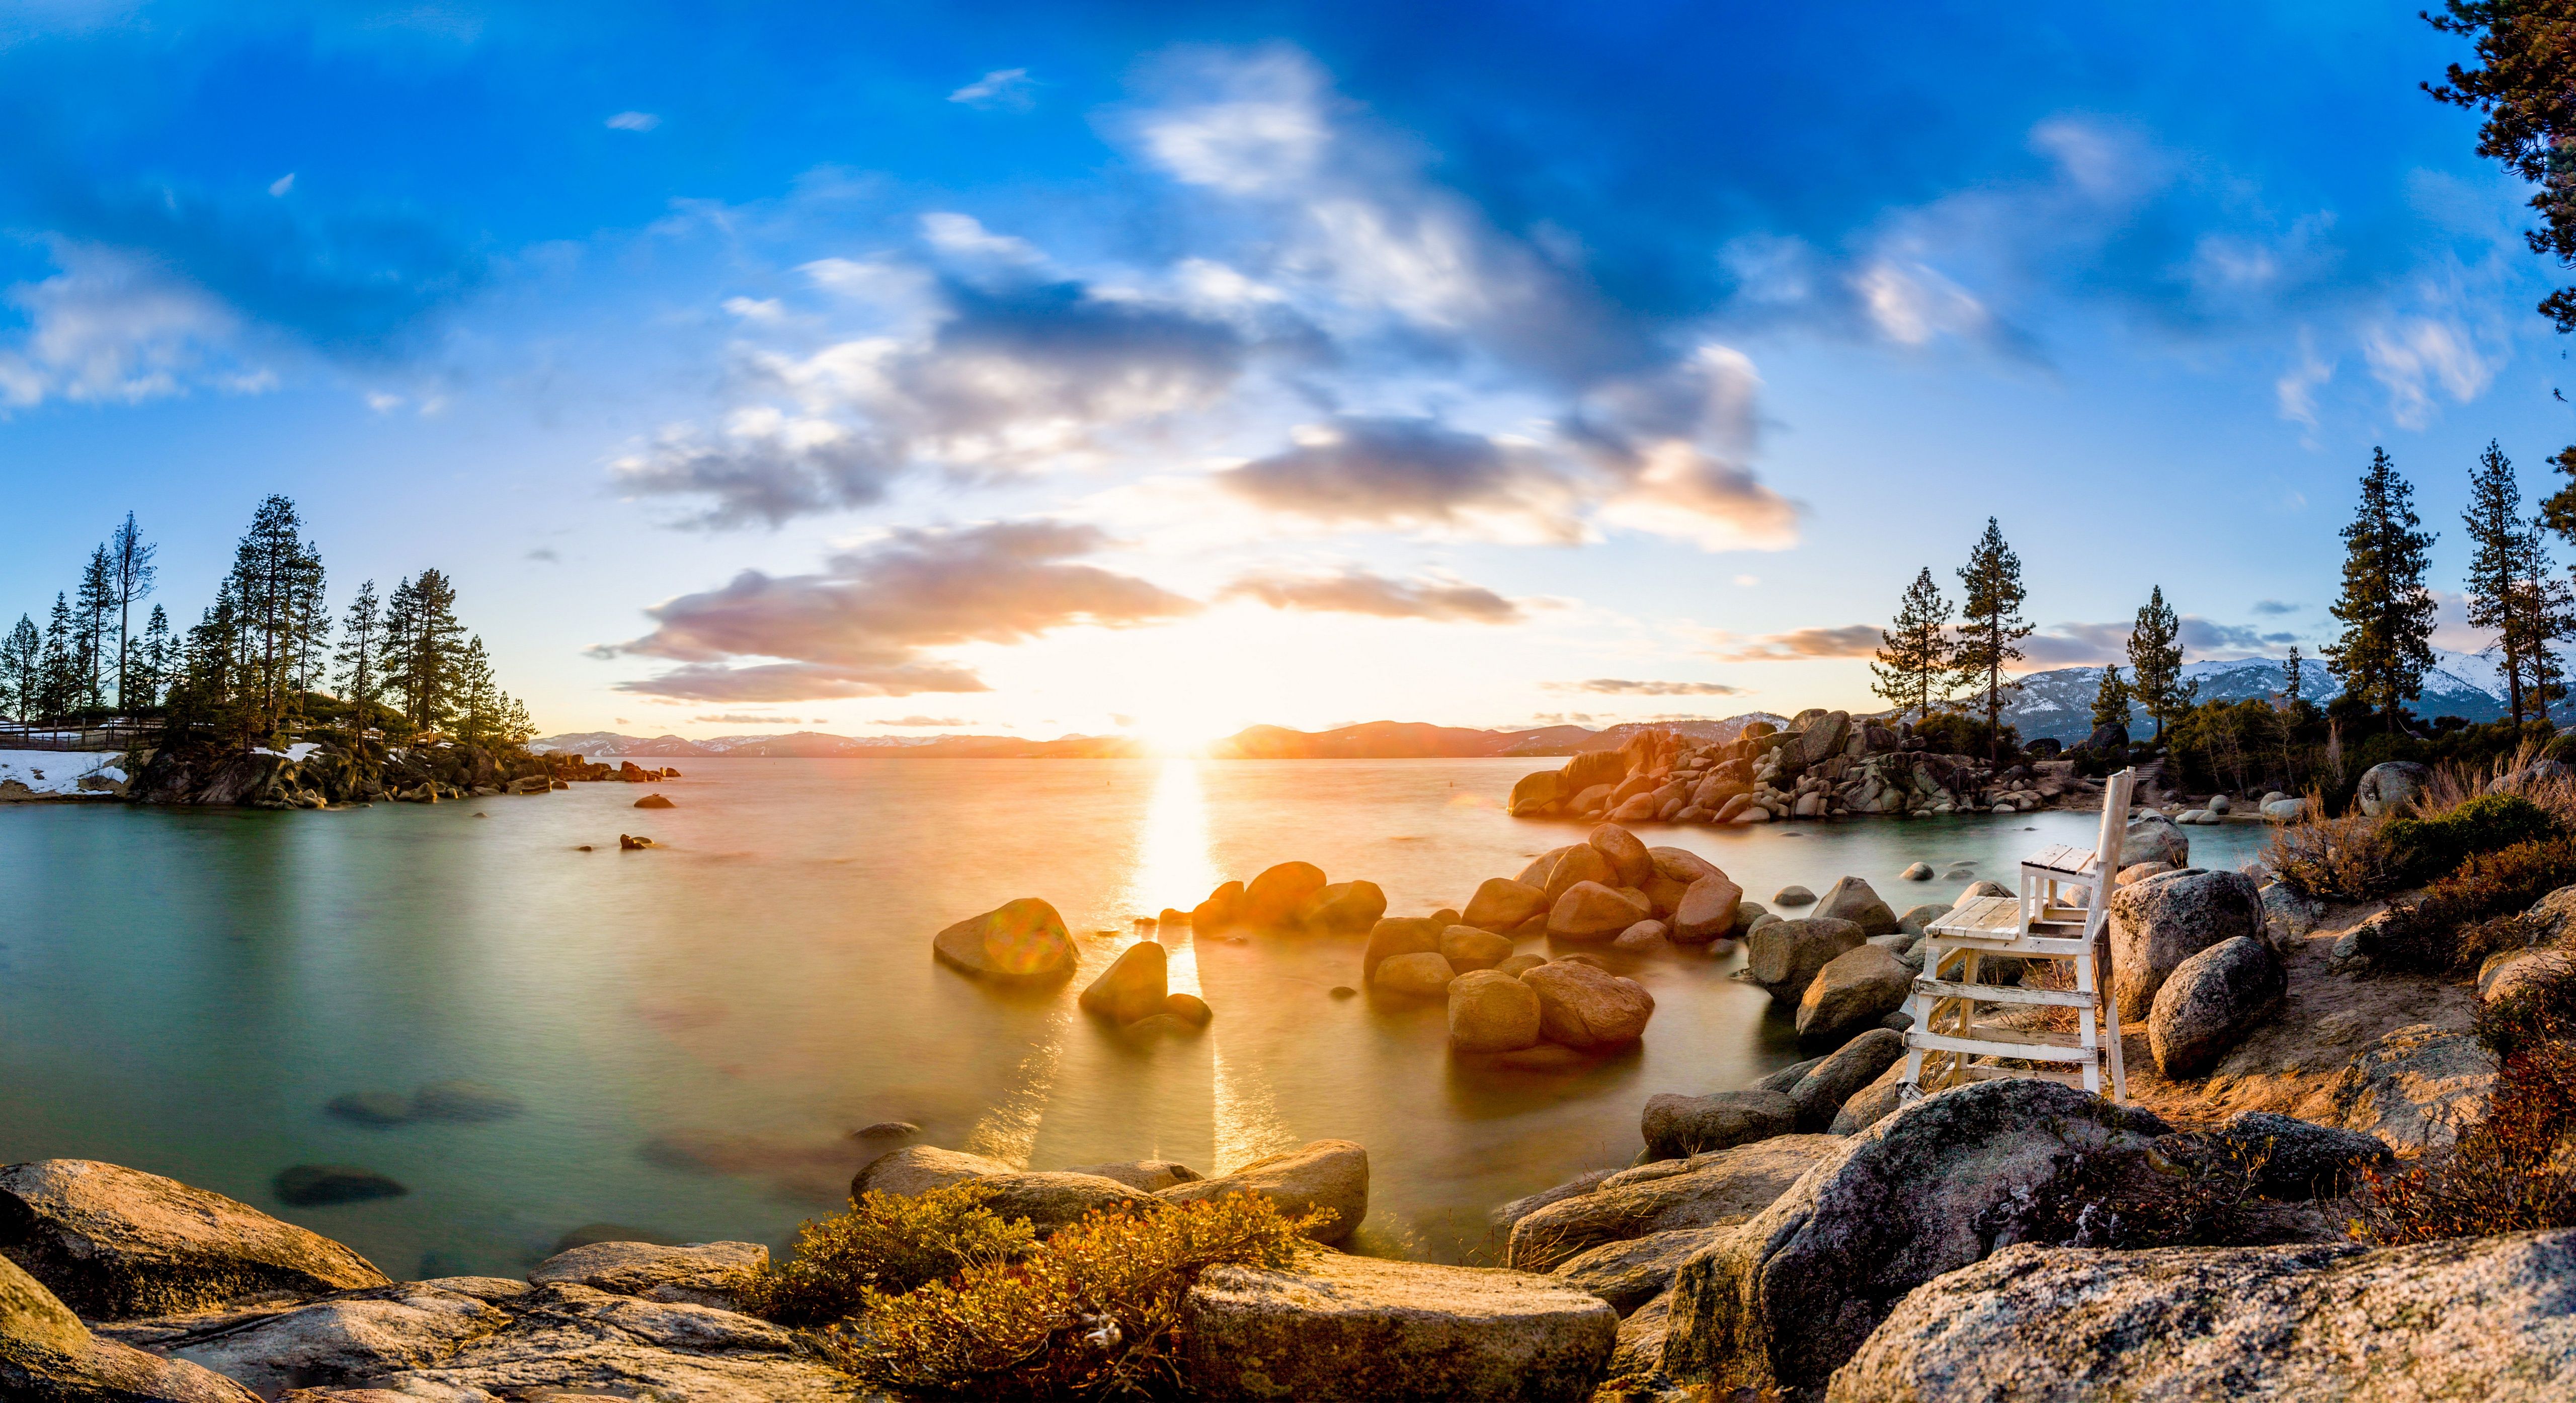 5120x2788 Lake Tahoe In United States Hd Nature 4k Wallpaper Image Background Photo And Picture